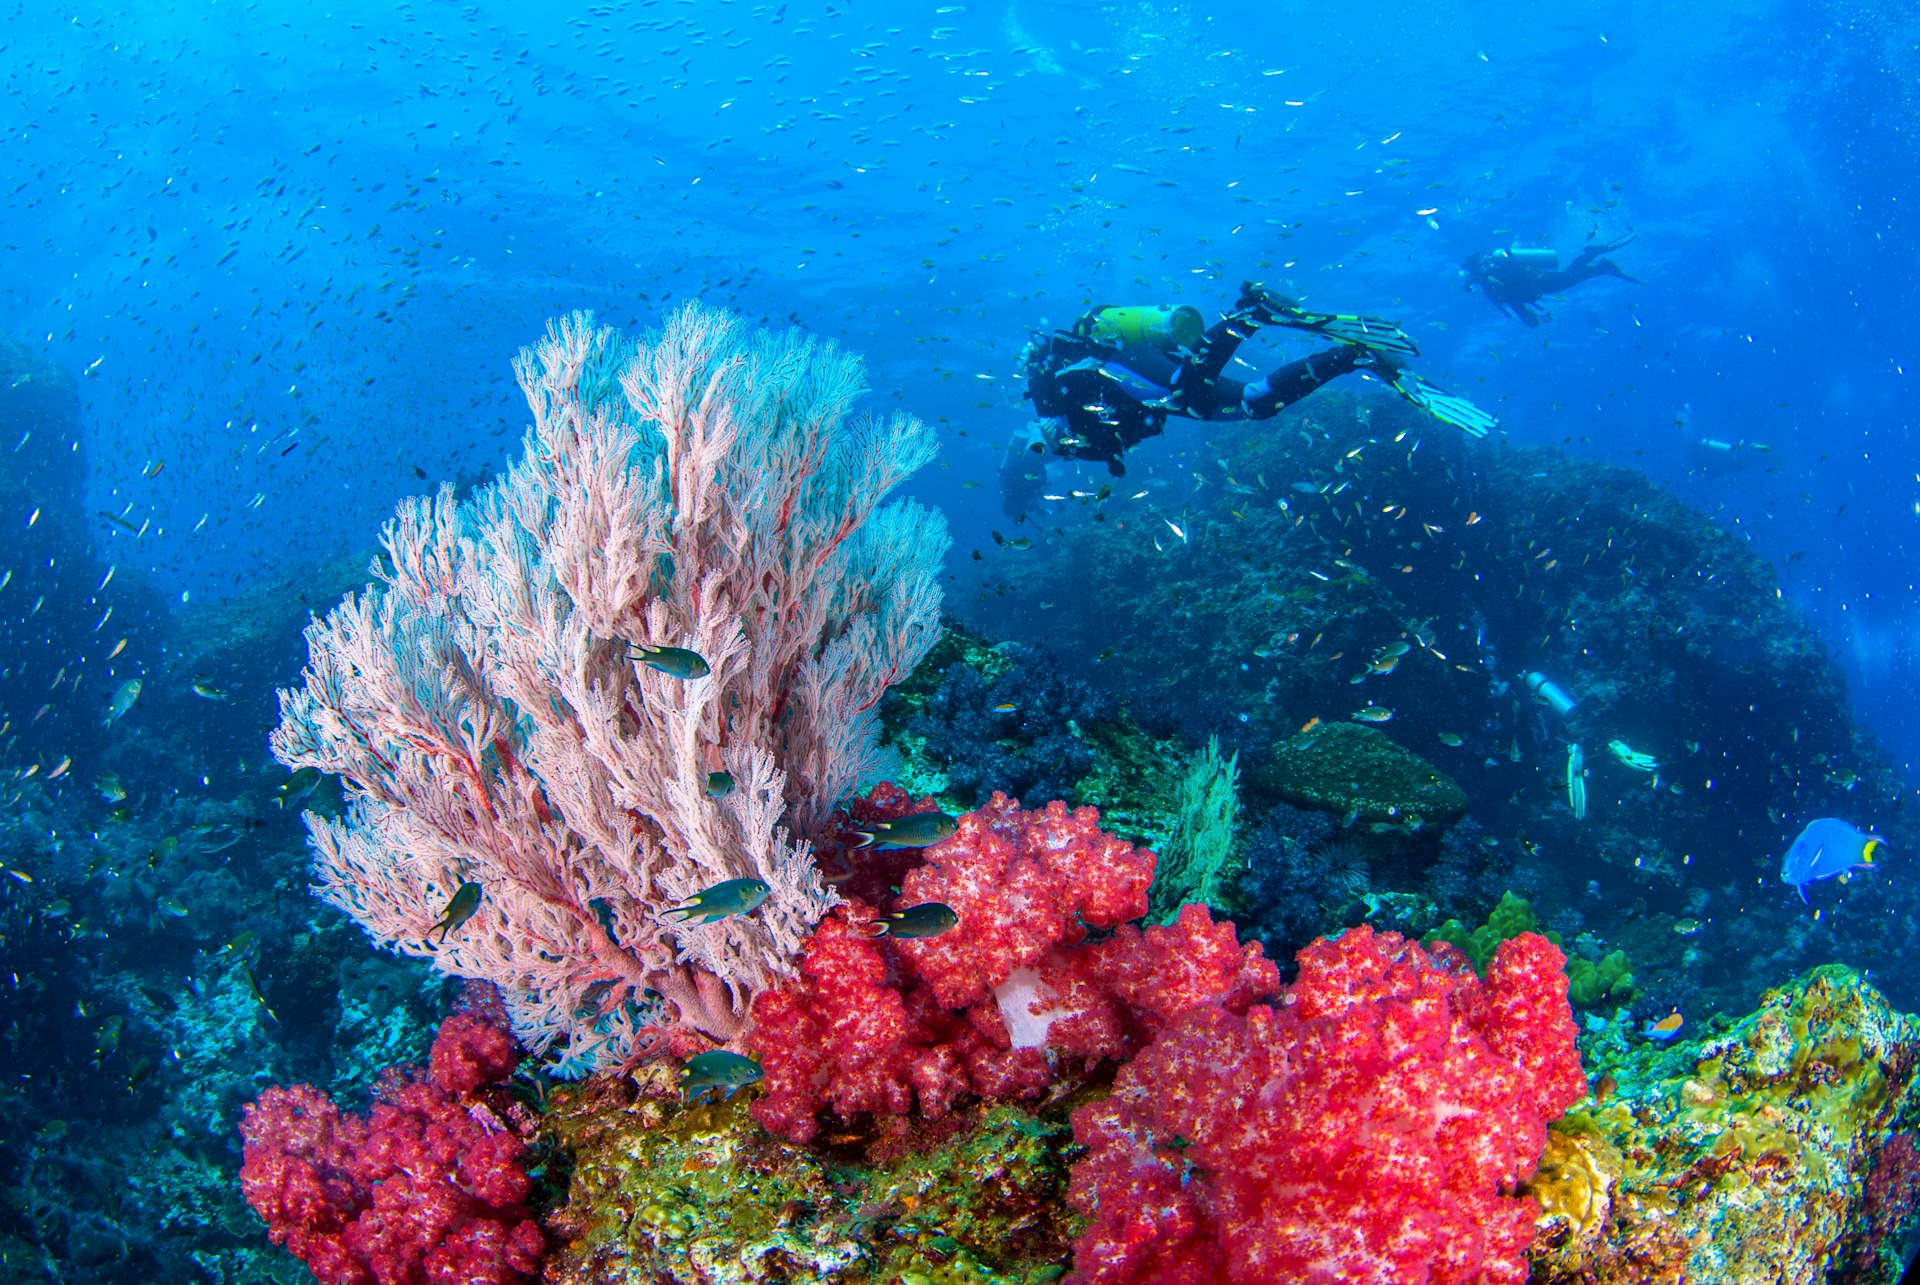 Two scuba divers swim beside colorful soft coral and a huge seafan with many silver-colored fish darting by